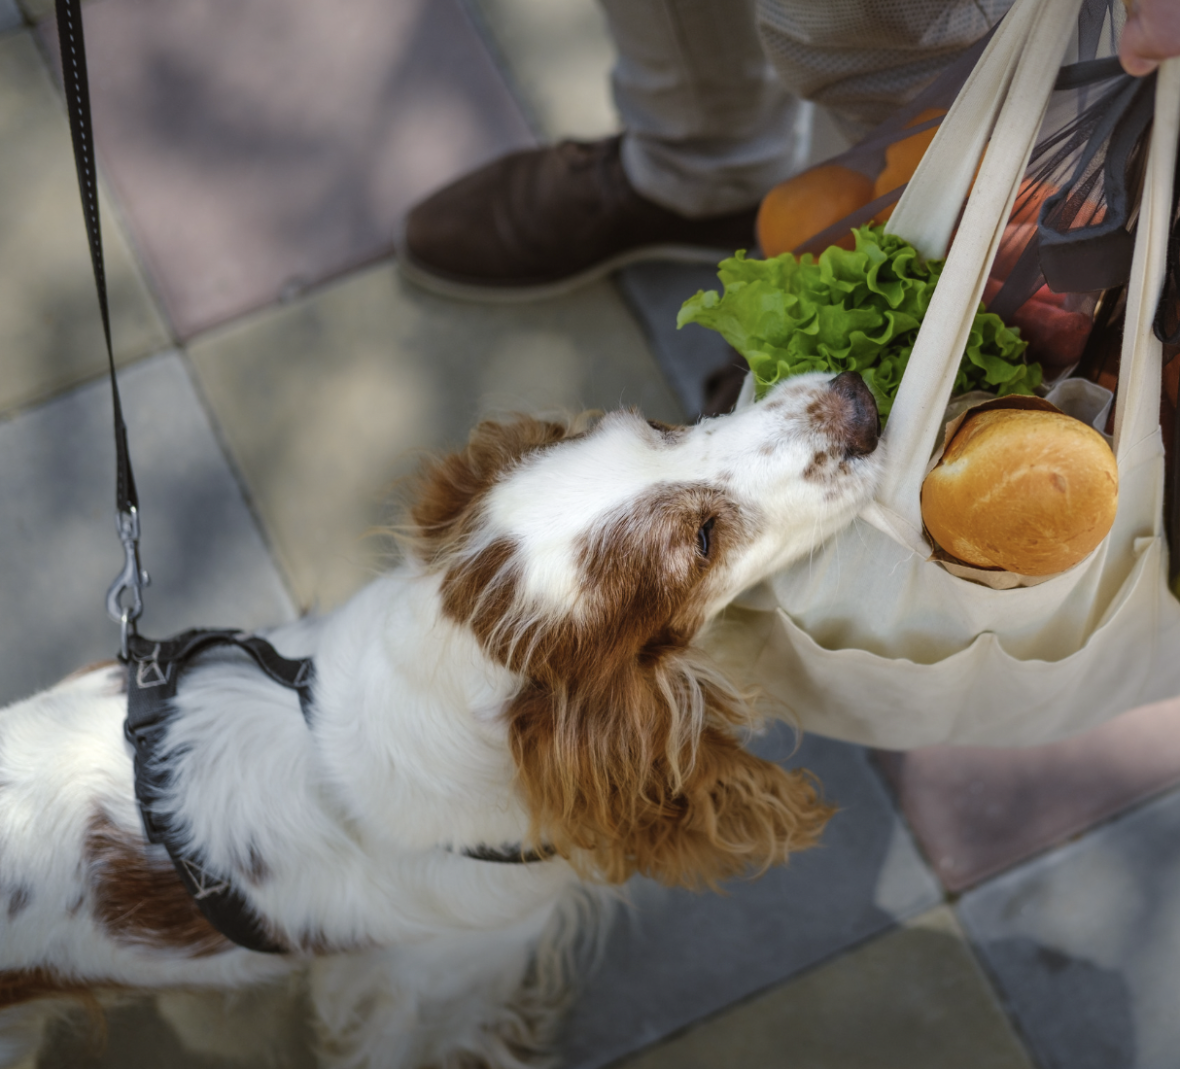 Can You Buy Dog Food with Food Stamps? : dog smelling a bag full of groceries